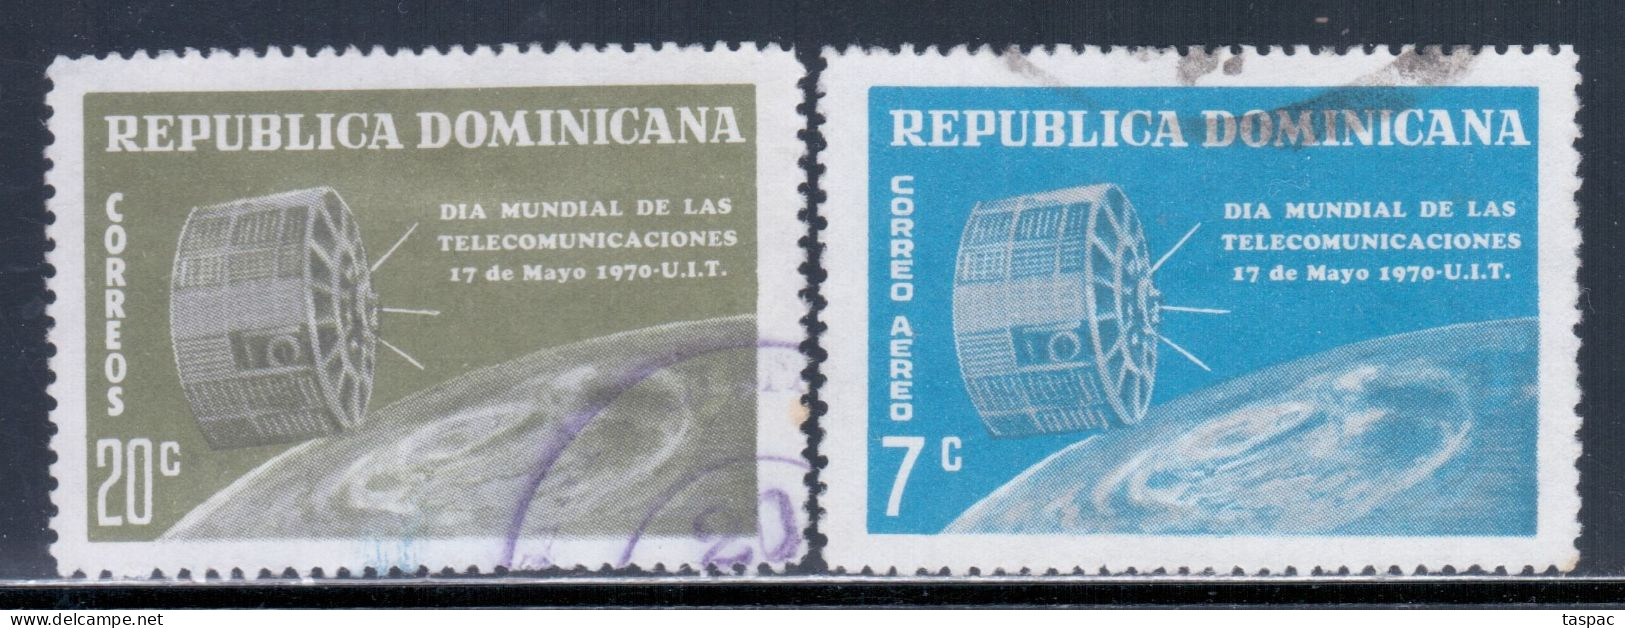 Dominican Republic 1970 Mi# 960-961 Used - World Telecommunications Day / Communications Satellite / Space - North  America